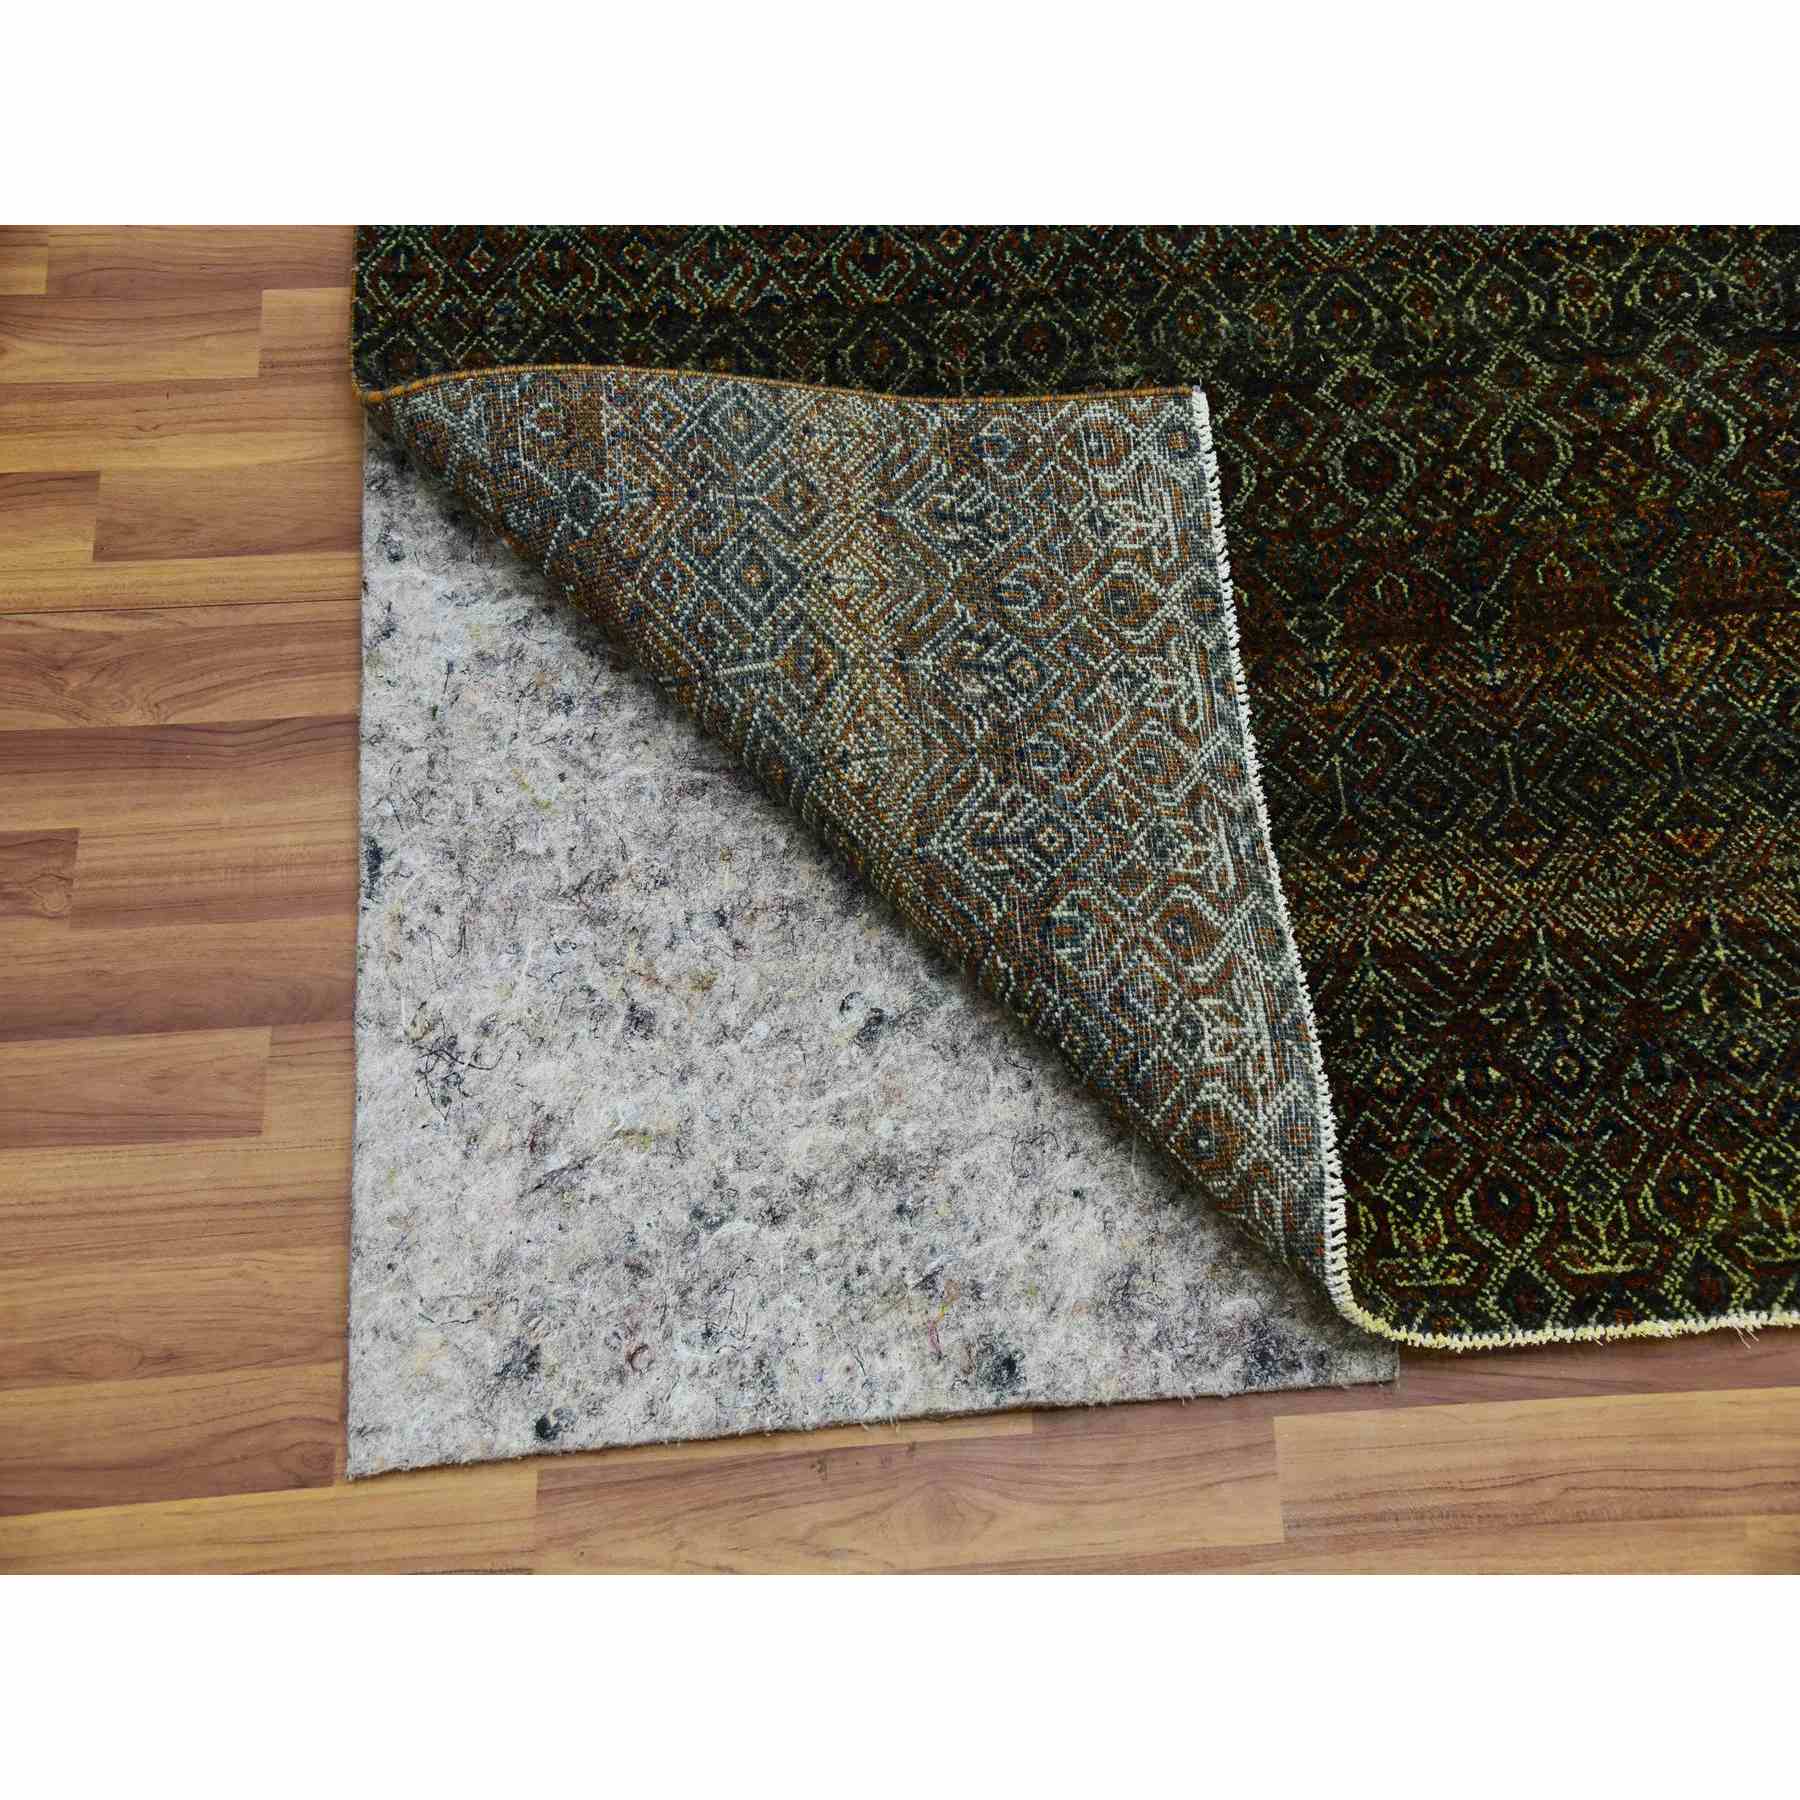 Modern-and-Contemporary-Hand-Knotted-Rug-397380